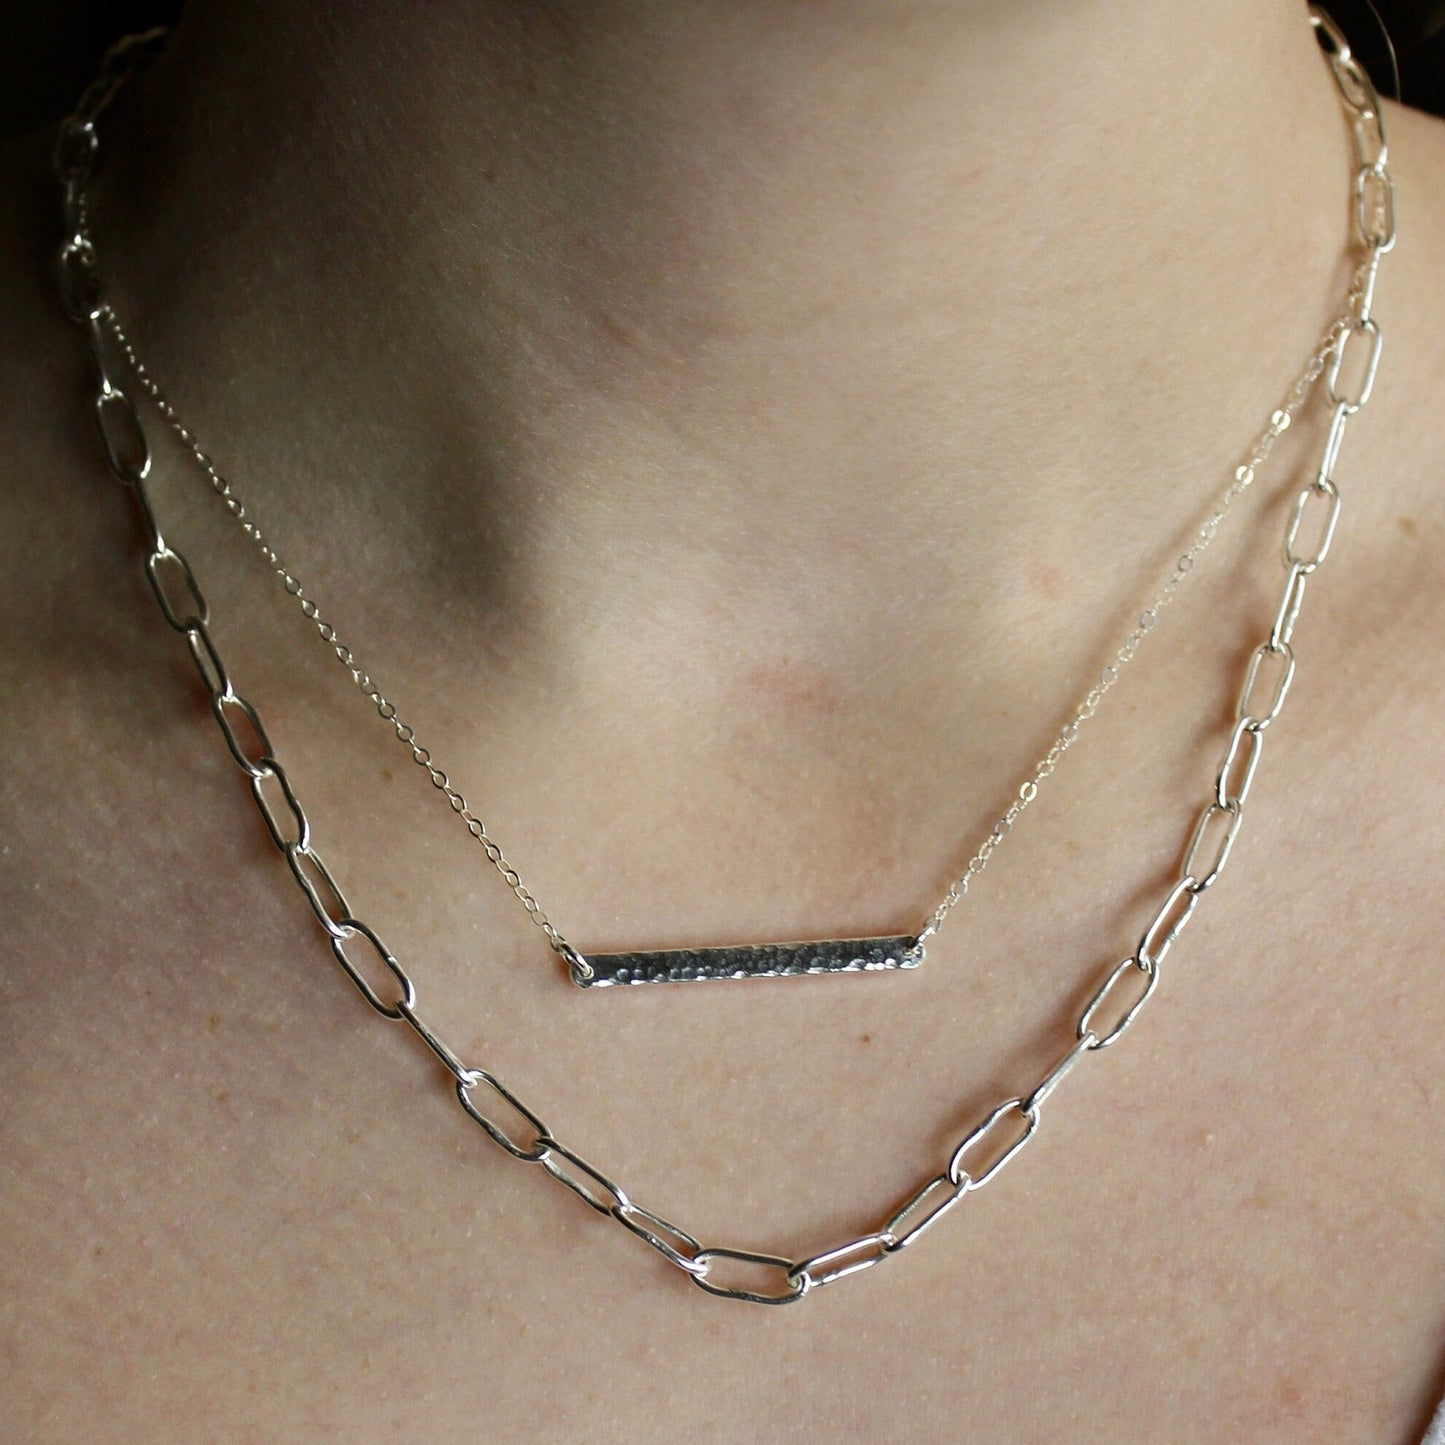 This is a handmade lightweight sterling silver chain with oval links that are approximately 10mm long.